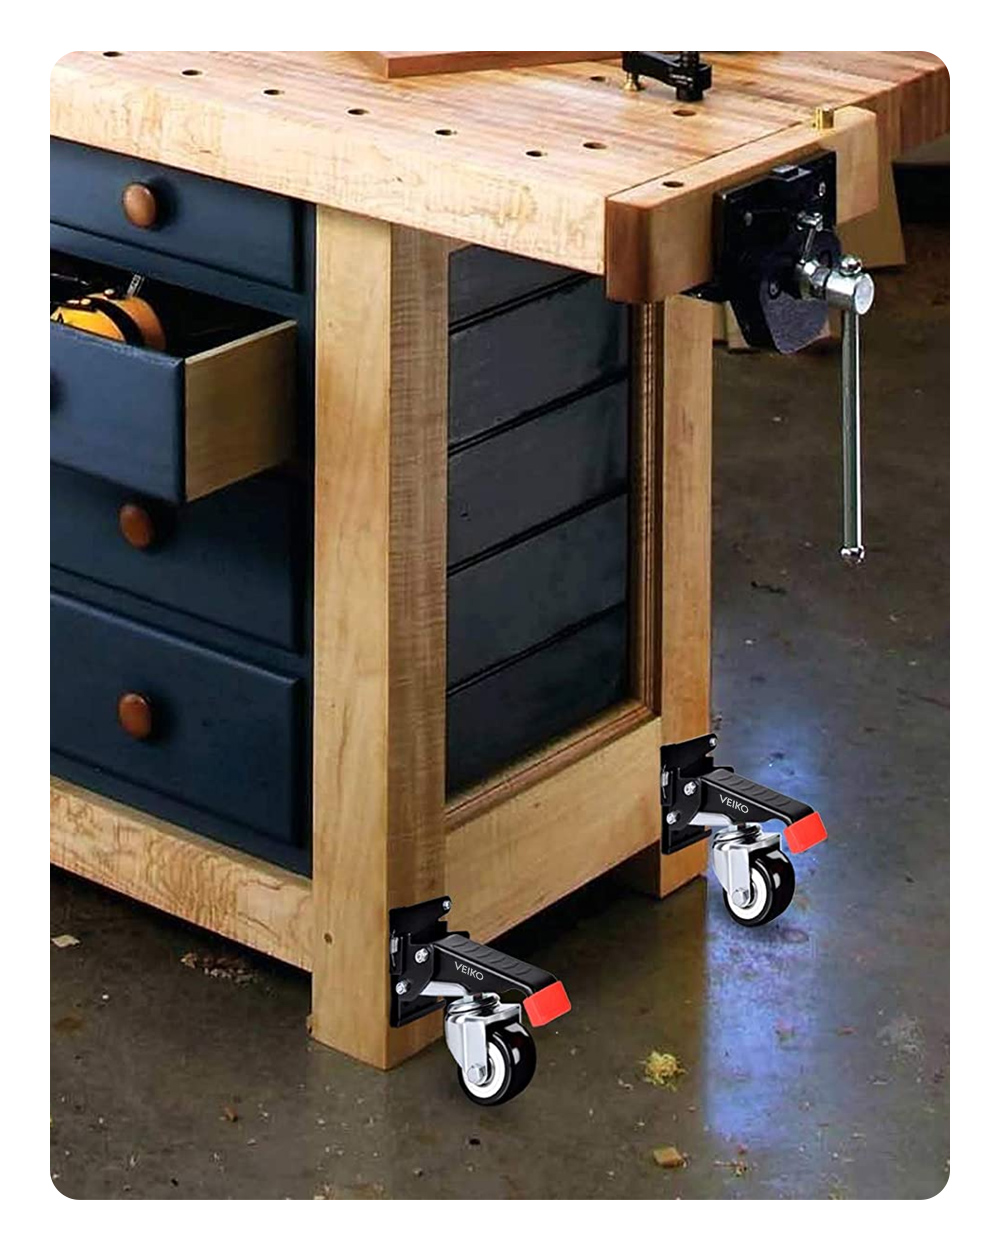 VEIKO-4PCS-Quick-Change-Workbench-Casters-Kit-Heavy-Duty-Retractable-Workbench-Casters-Wheels-660Lbs-1897937-9